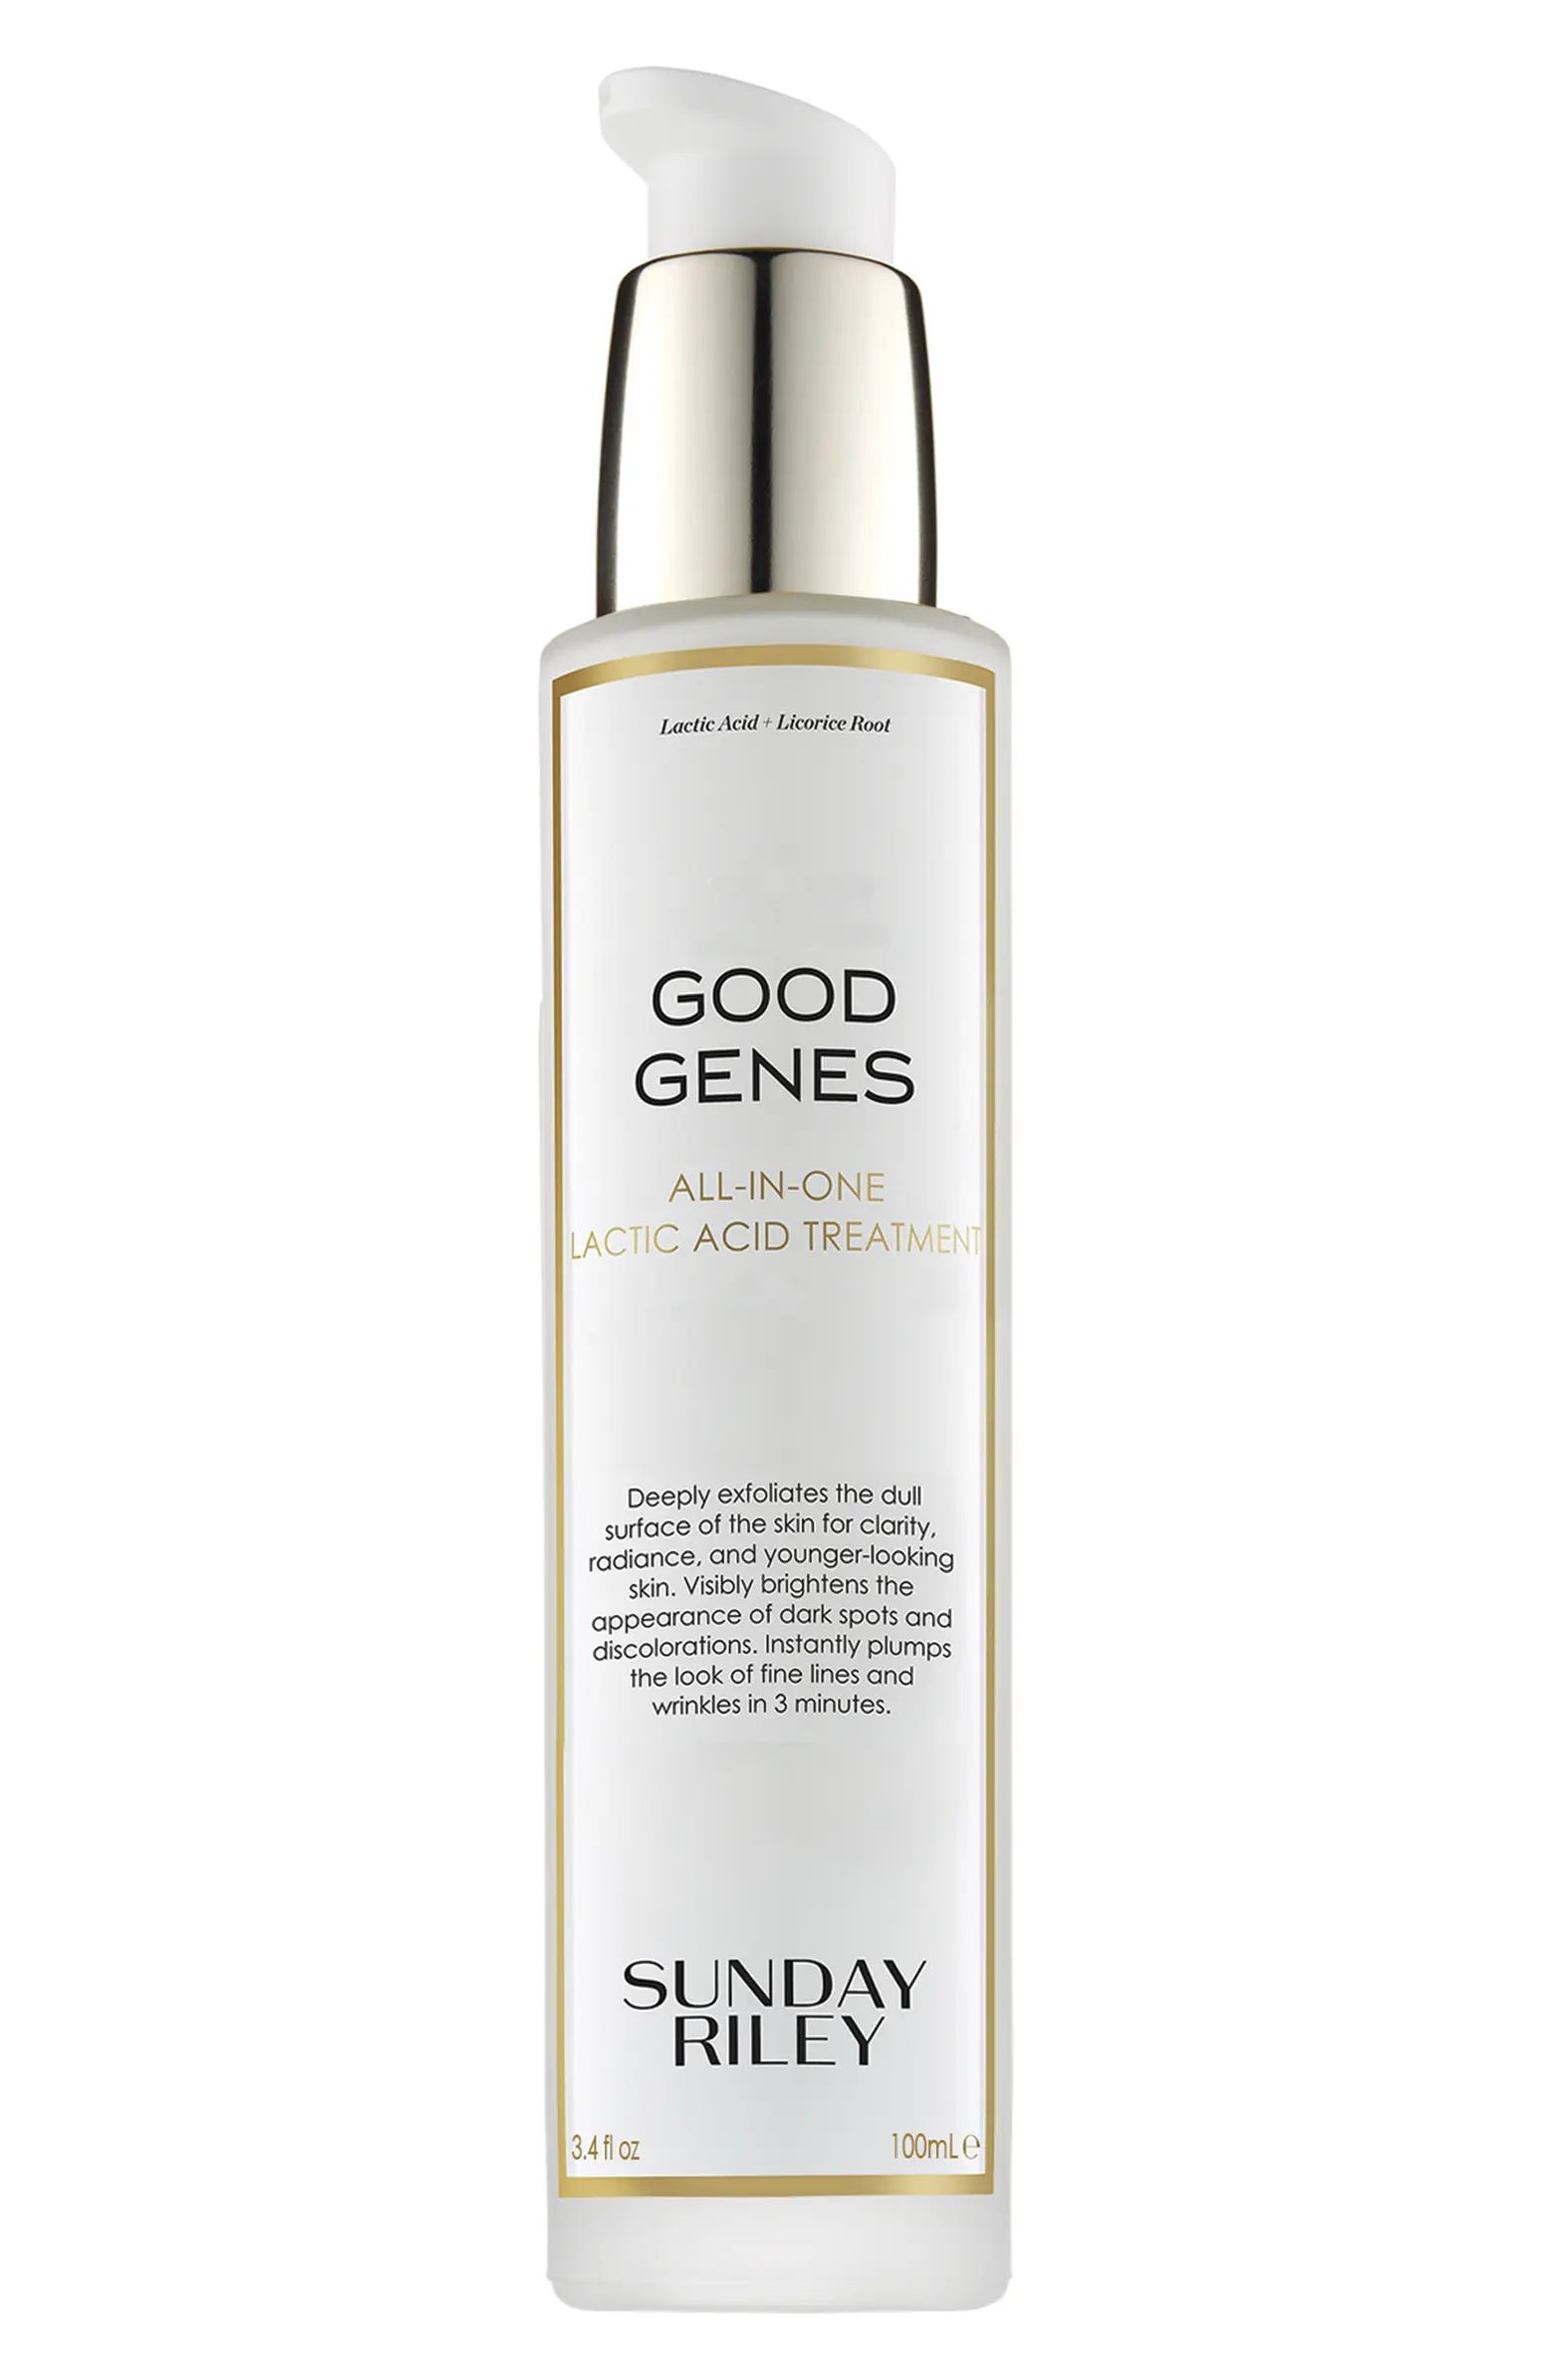 Jumbo Good Genes All-in-One Lactic Acid Exfoliating Face Treatment $284 Value | Nordstrom